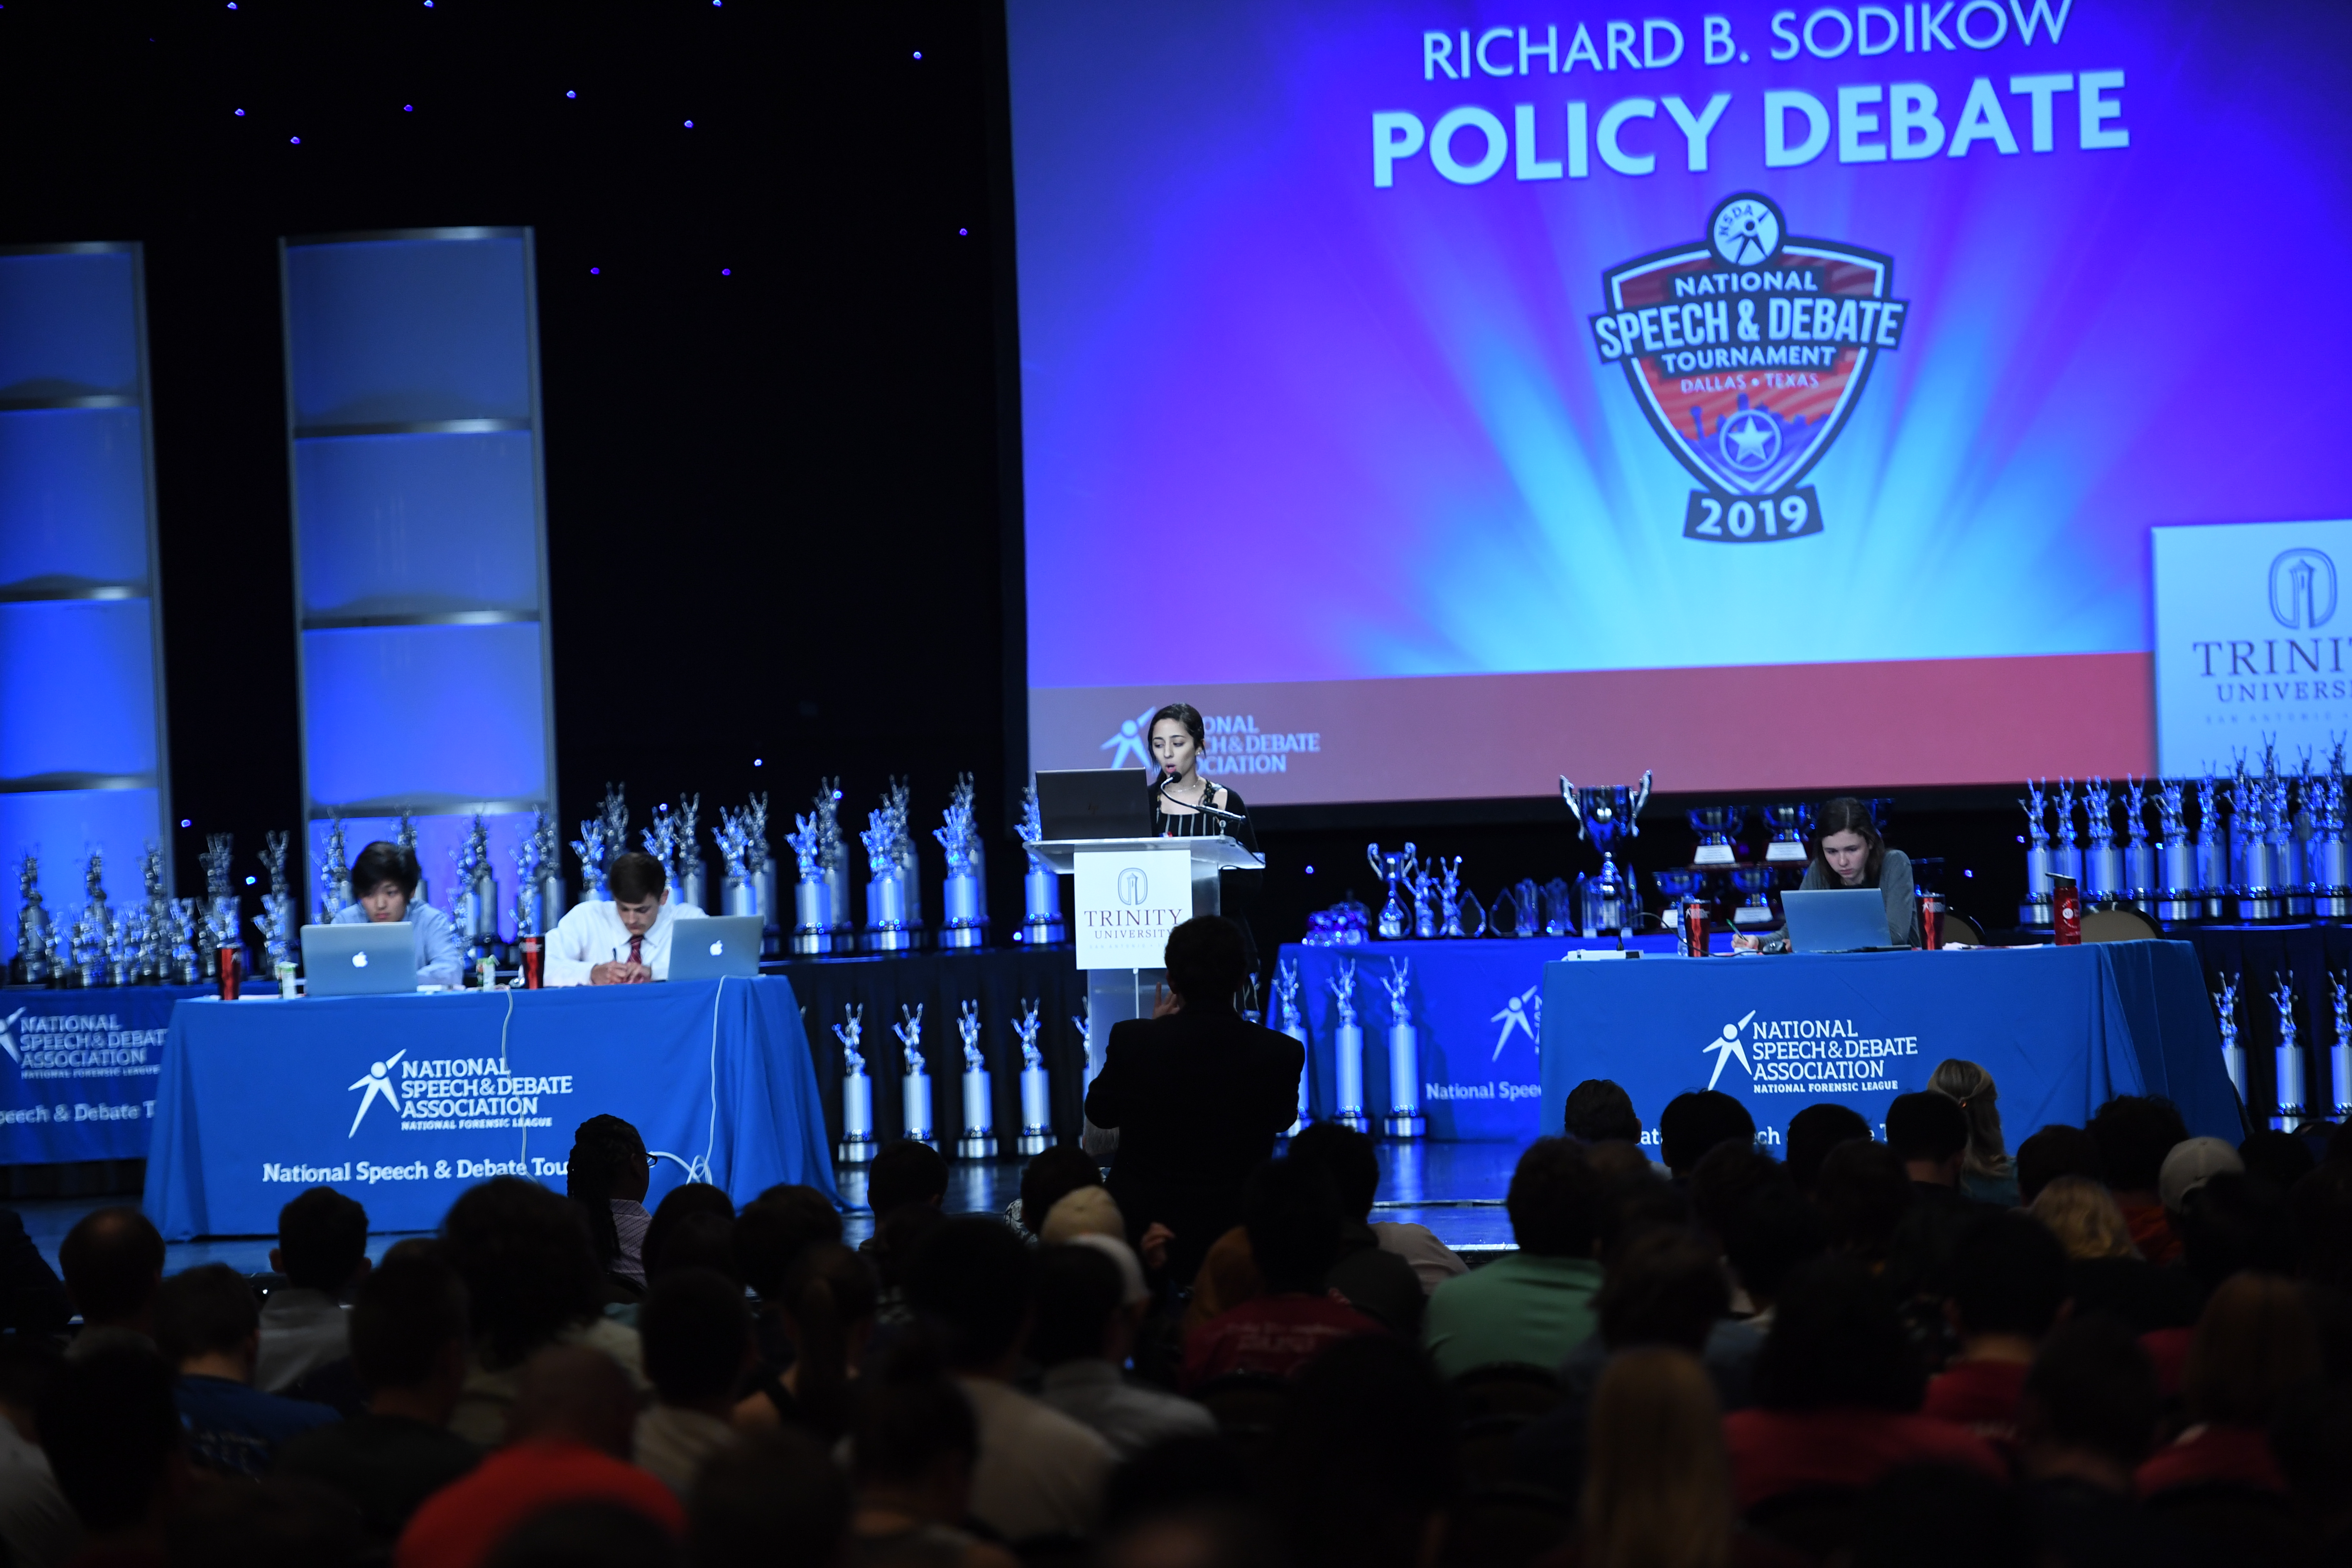 2019 Final Round - Policy Debate